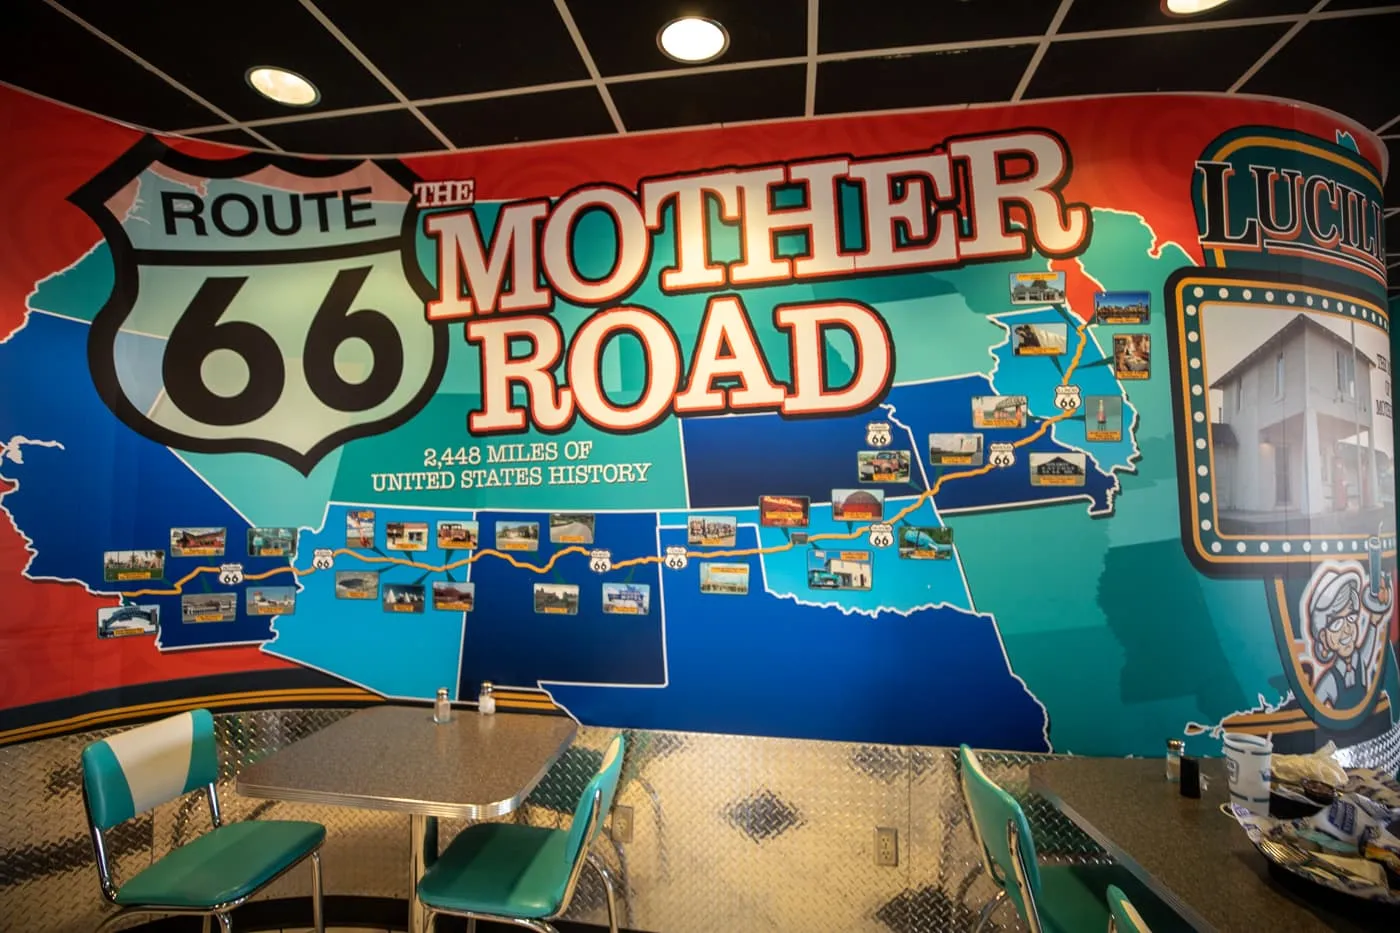 Route 66 Mother Road mural at Lucille’s Roadhouse Diner in Weatherford, Oklahoma Route 66